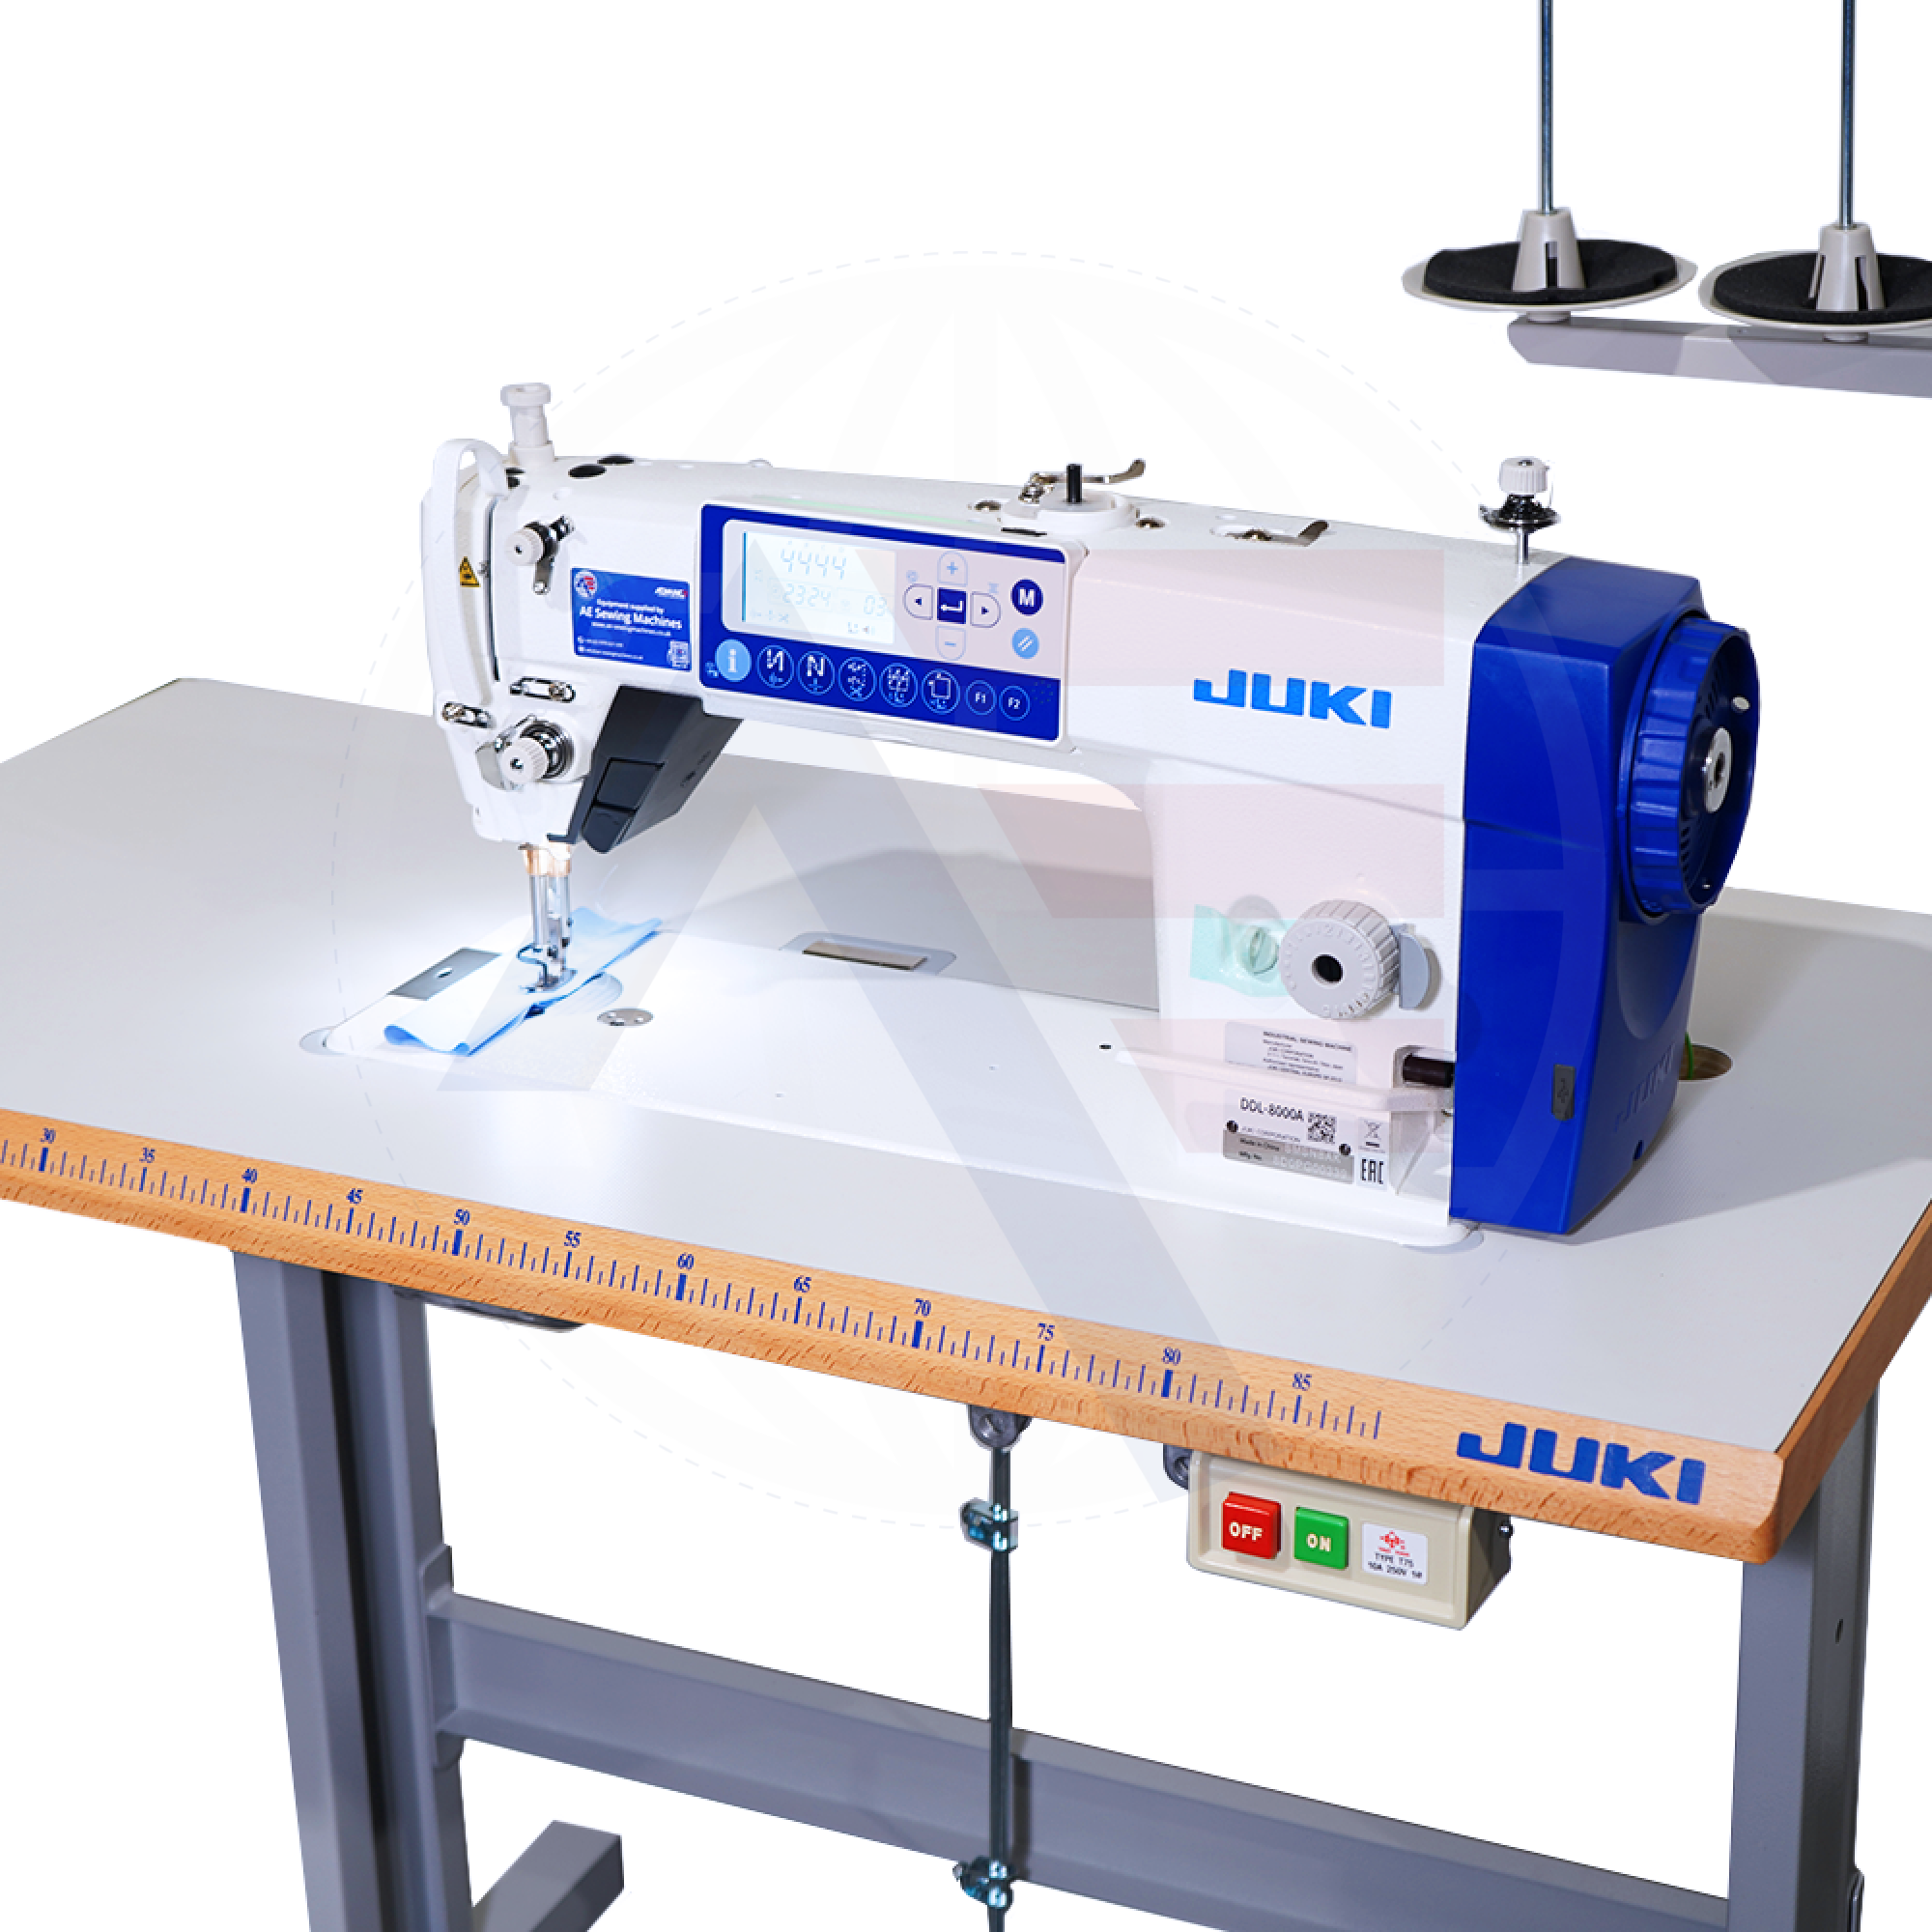 Juki Simply Smart Series Ddl-8000A 1-Needle Lockstitch Machine With Automatic Functions Sewing